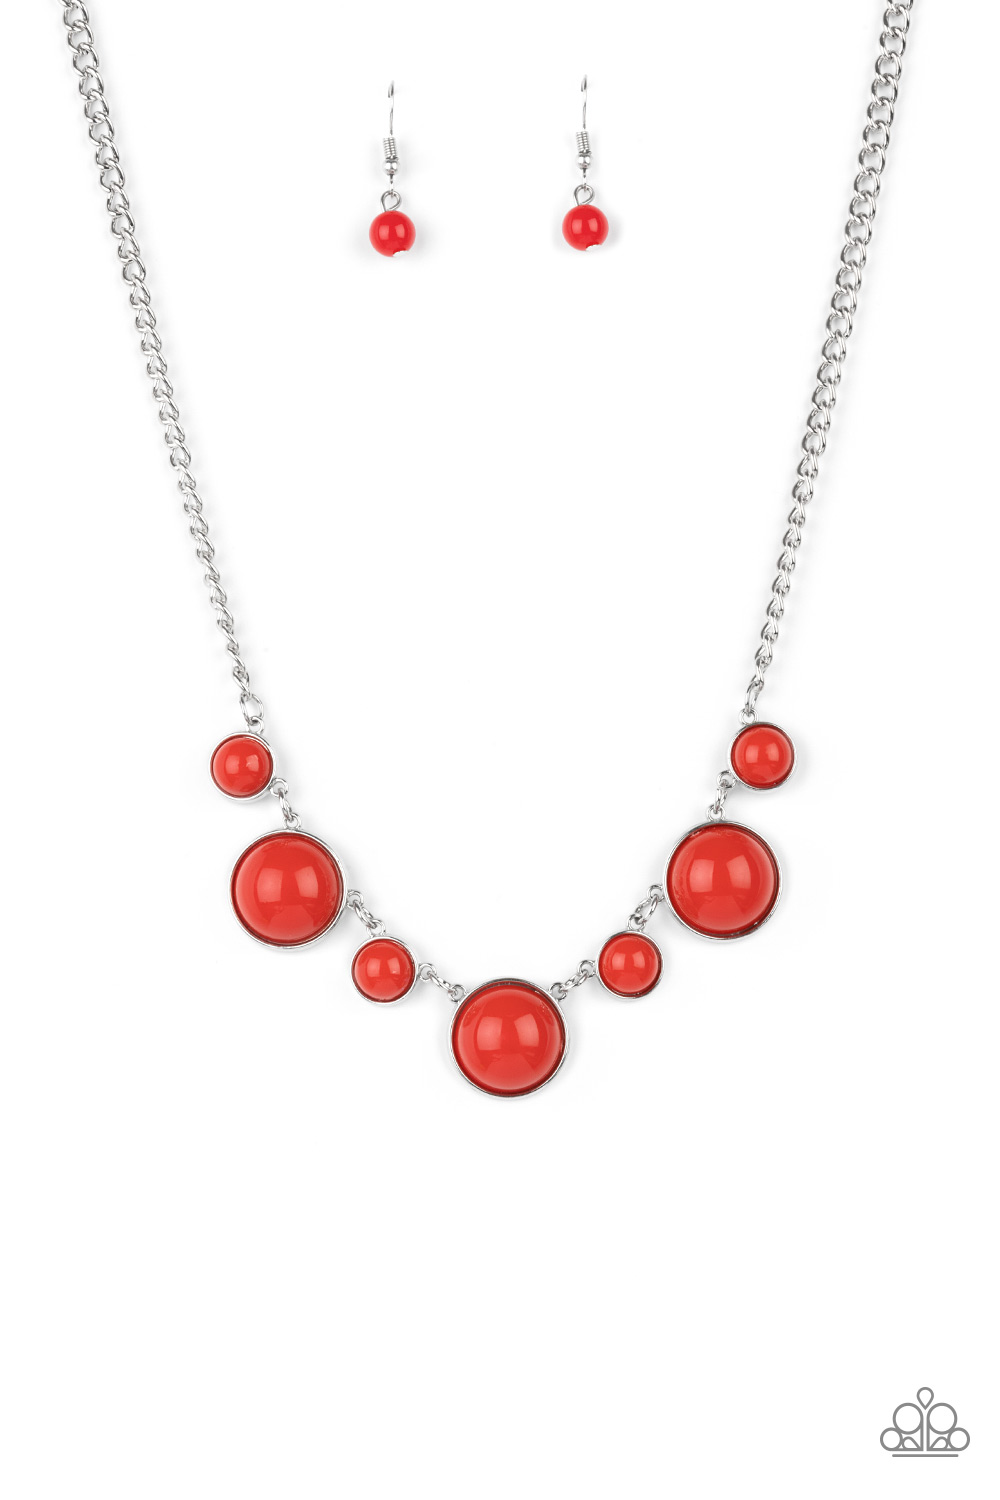 Necklace - Prismatically POP-tastic - Red